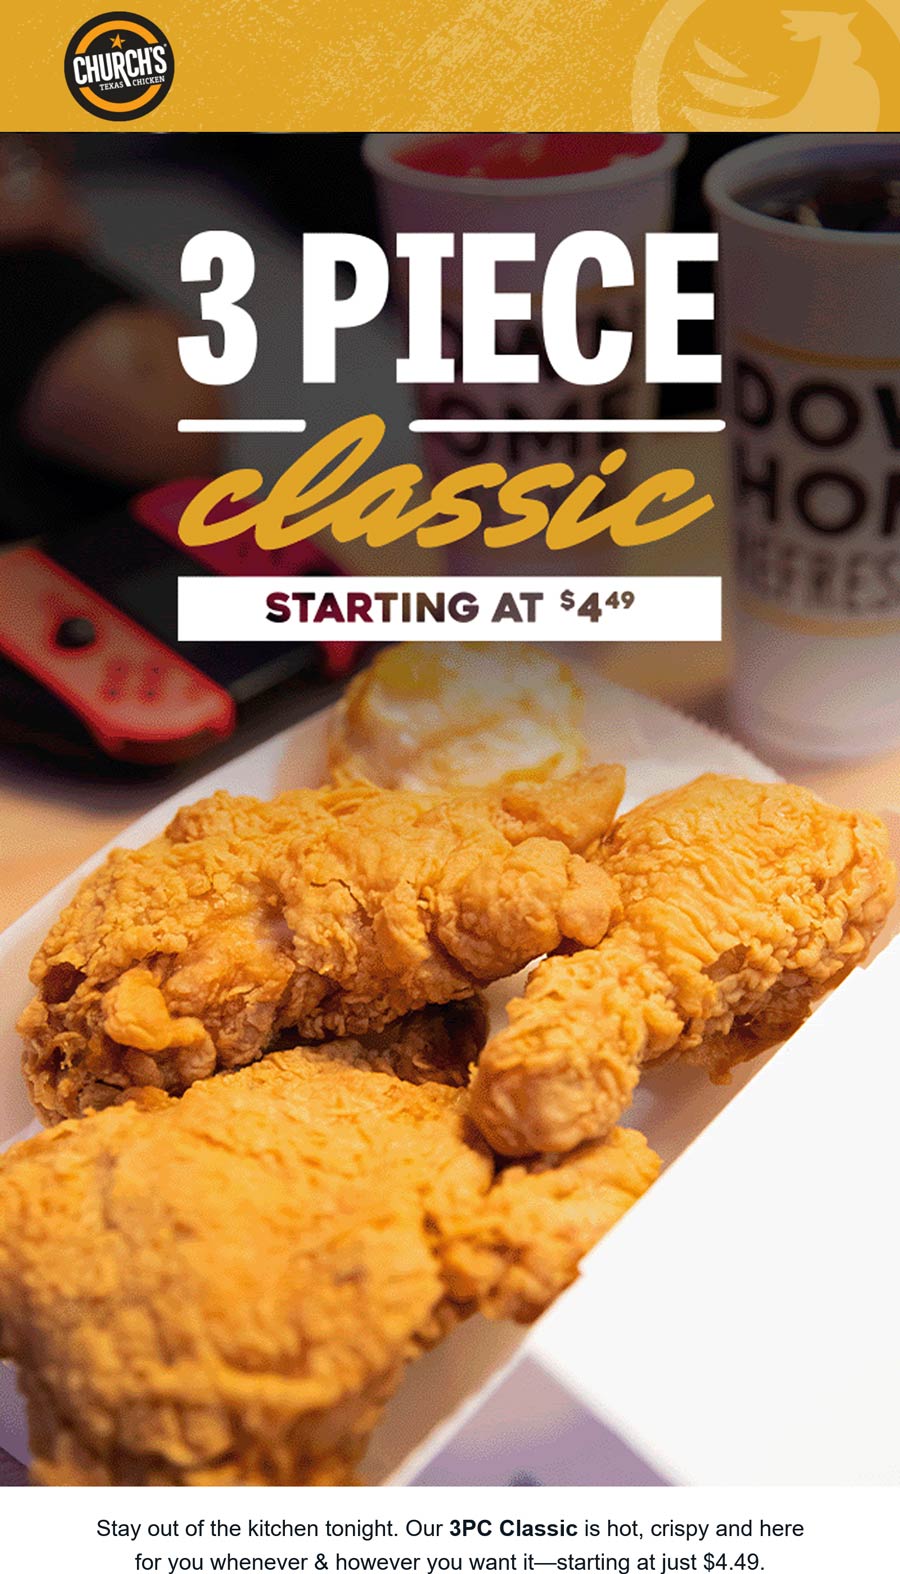 Churchs Chicken restaurants Coupon  3pc meal = $4.49 at Churchs Chicken #churchschicken 